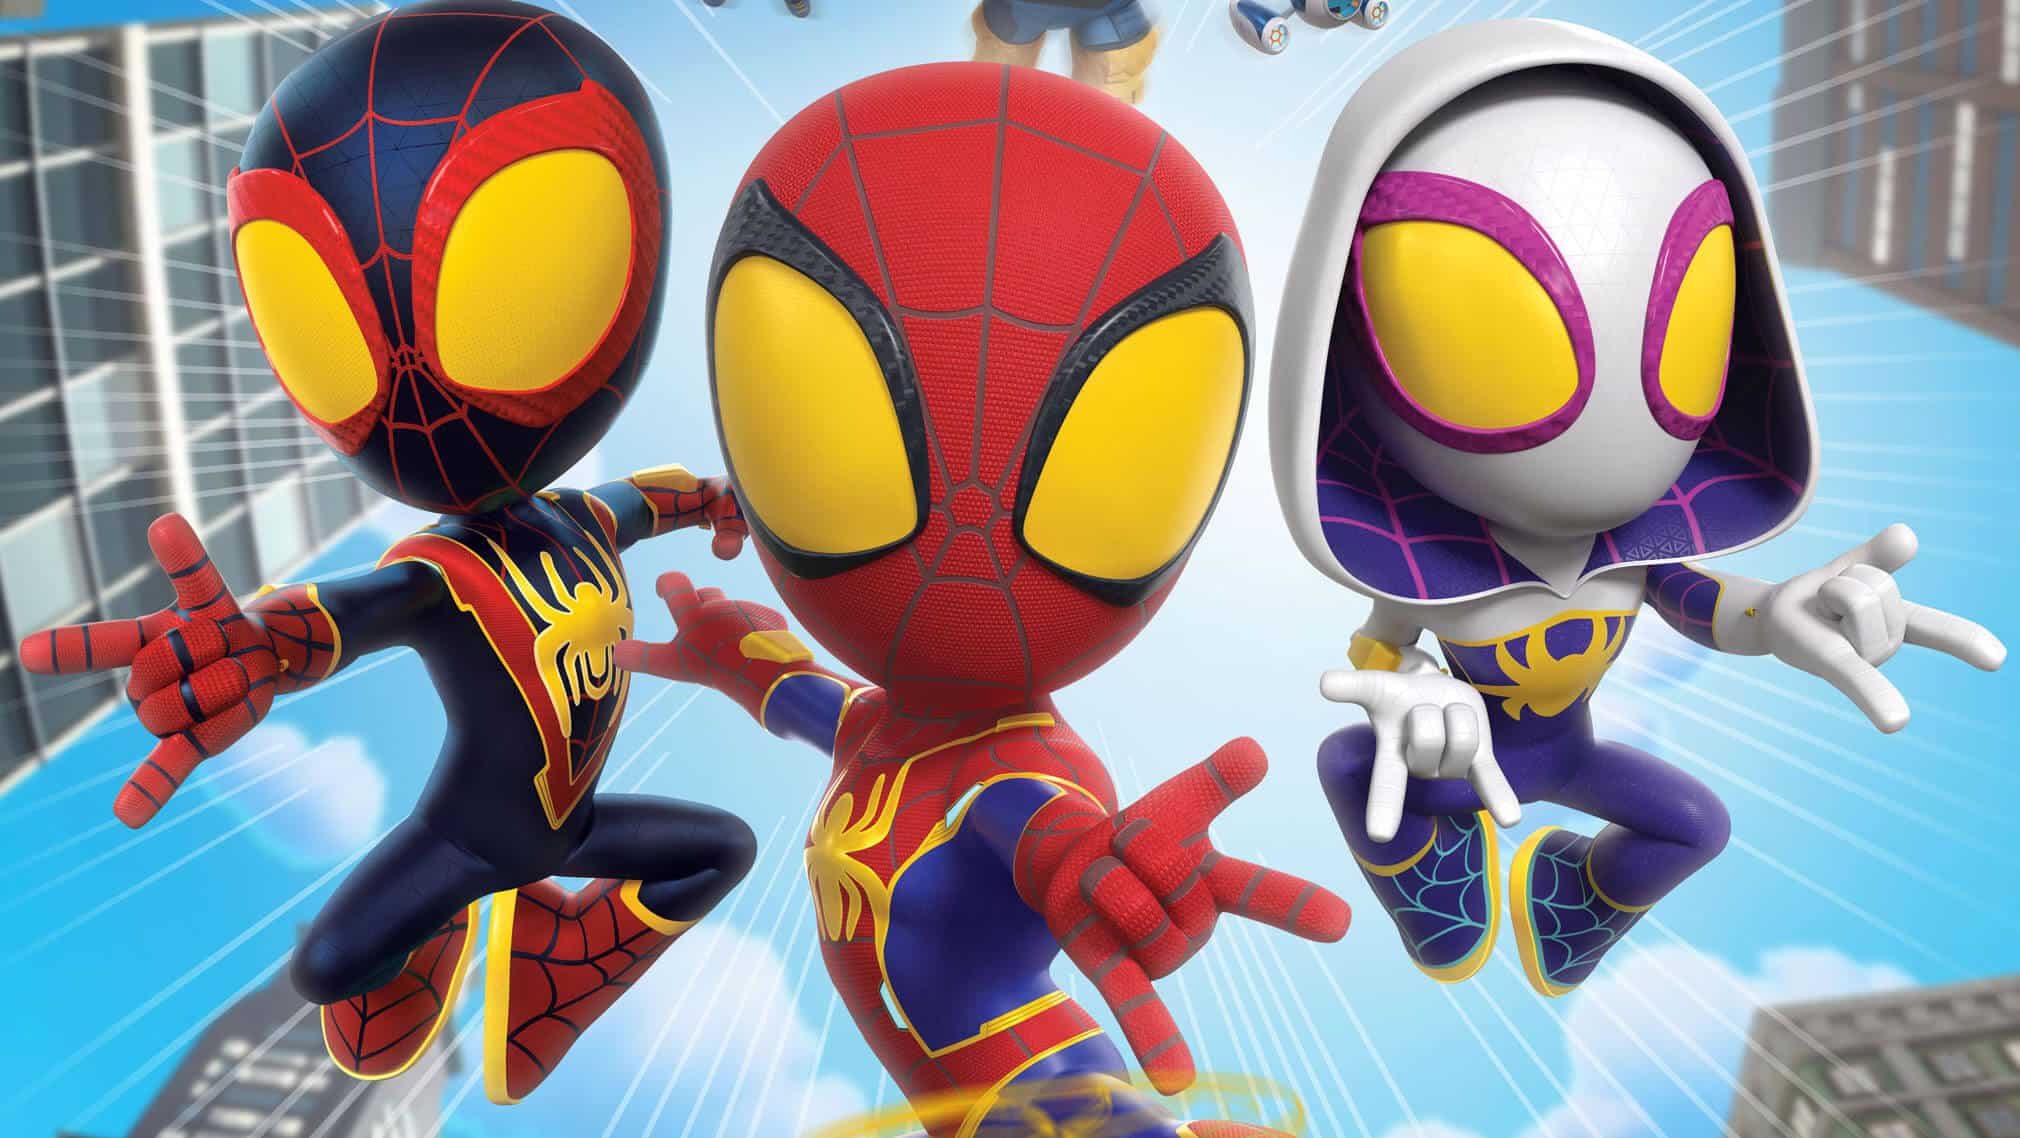 First Look At Marvel’s “Spidey And His Amazing Friends: Web Spinners ...